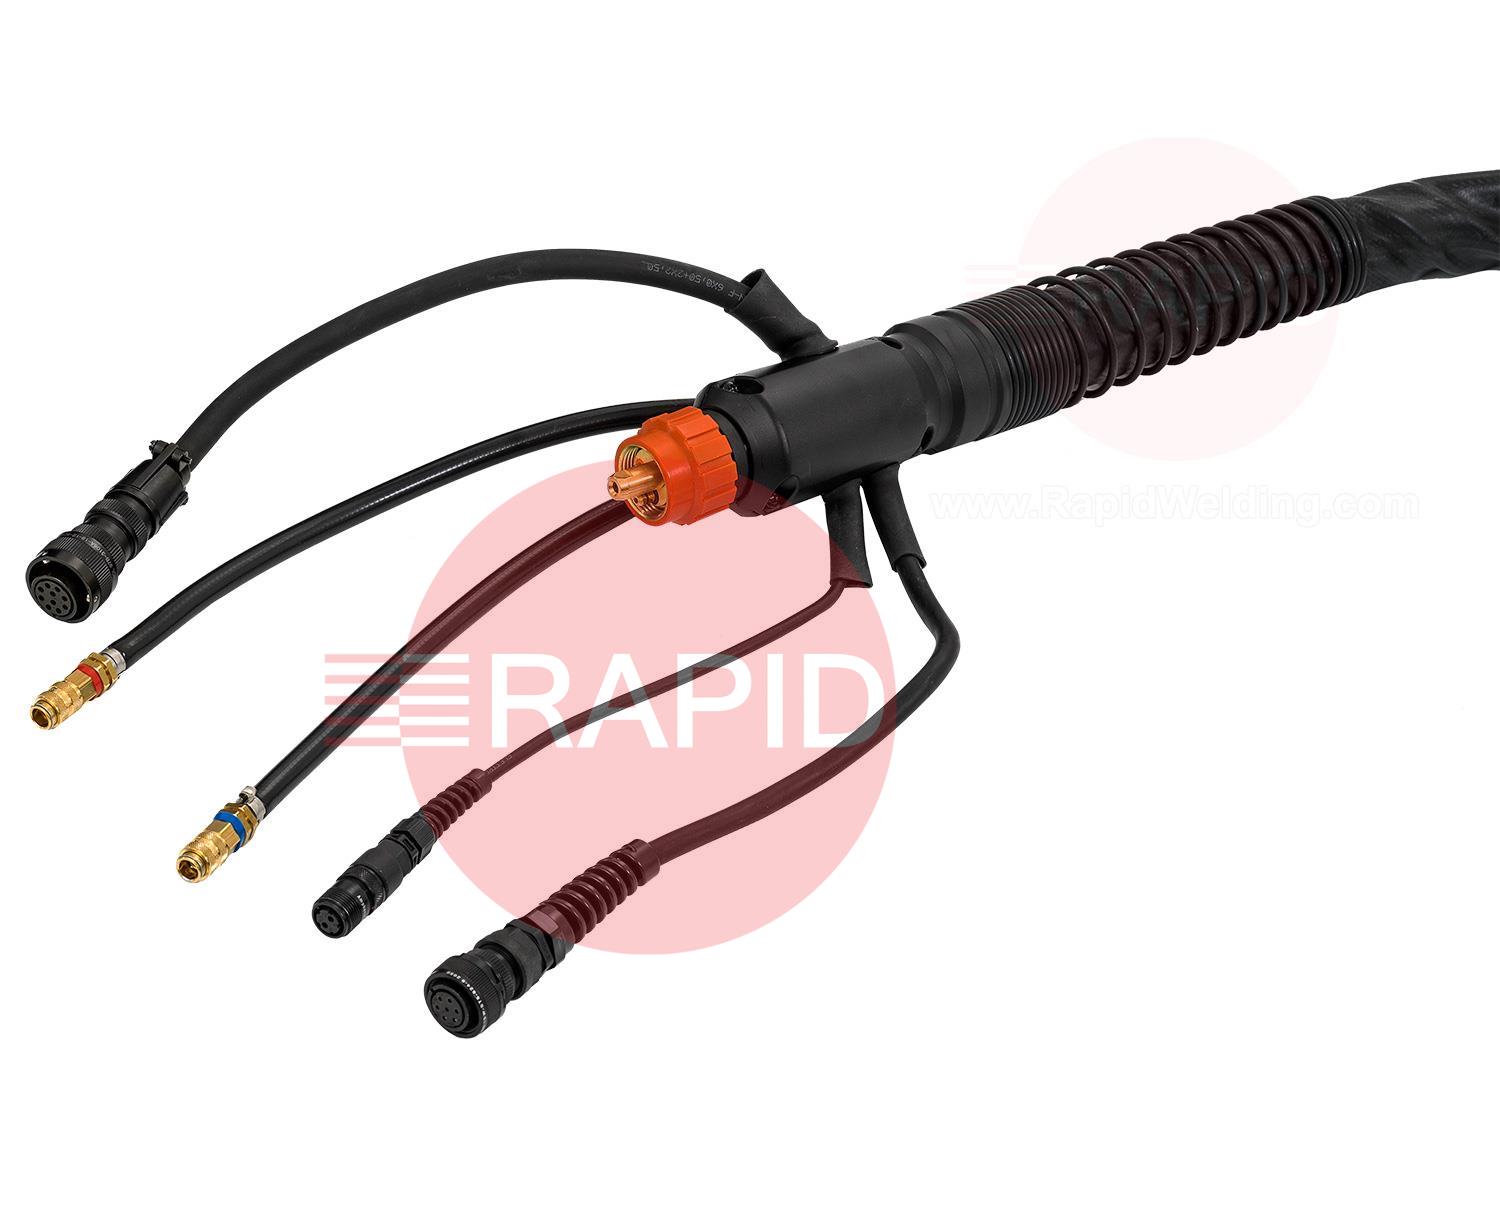 SGTXW205CBL  Kemppi Supersnake GTX Water Cooled Interconnection Cable (Std Liner FE 1.0-1.6mm) - 20m / 50mm2